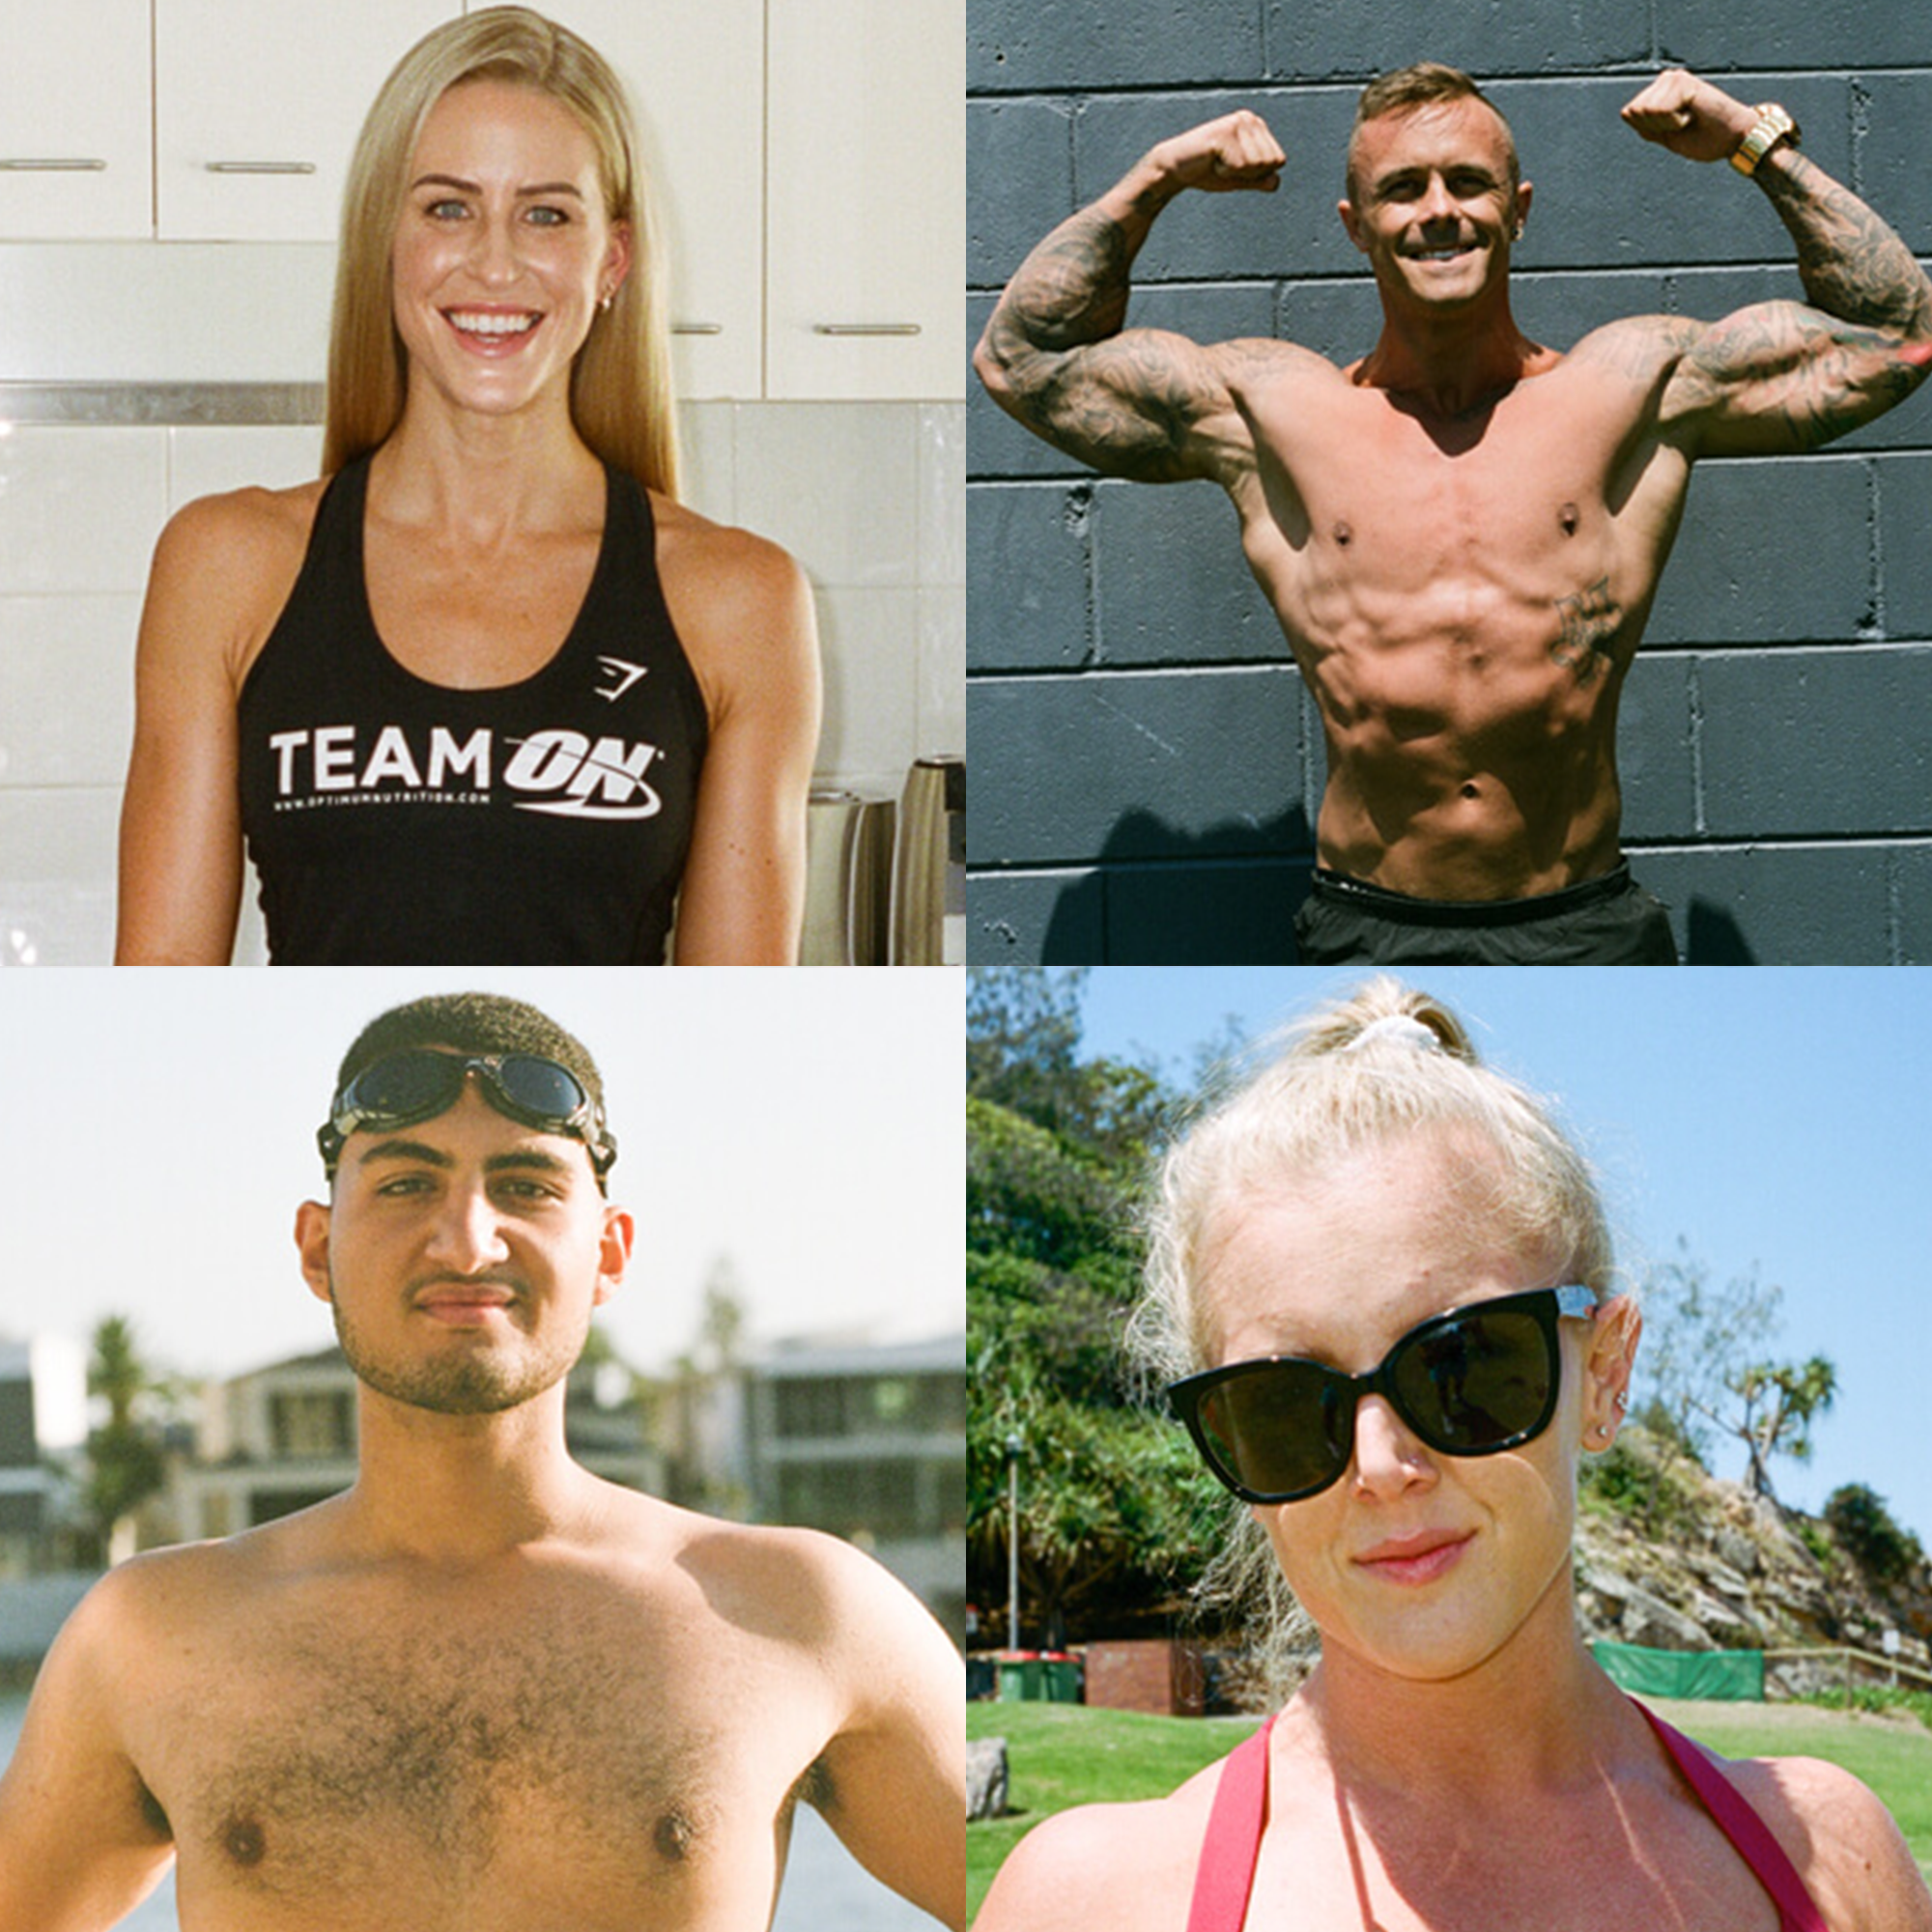 image of four different athletes, two women and two men 